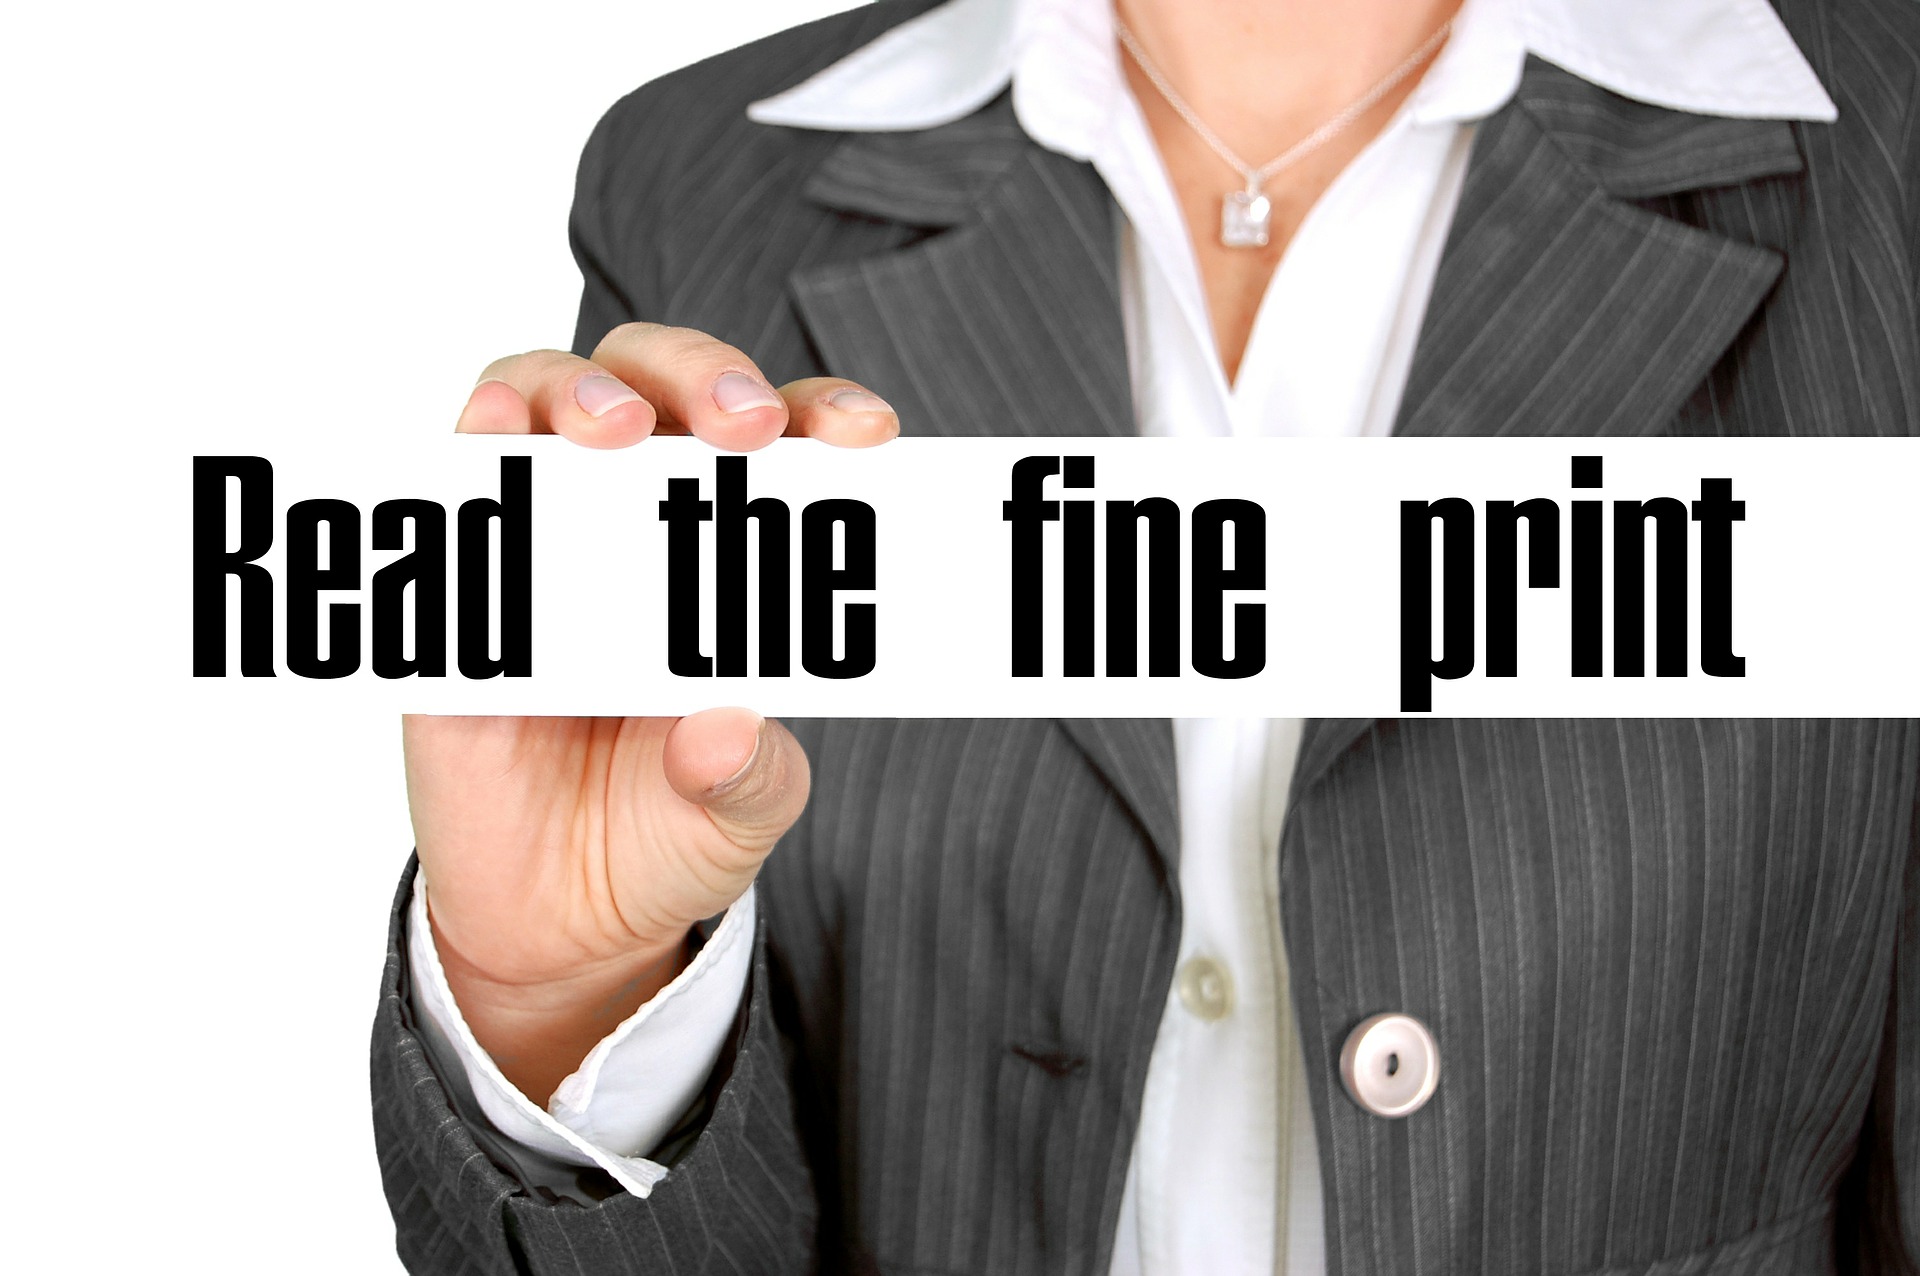 Woman holding sign that says Read the Fine Print; image by Geralt, via Pixabay.com.